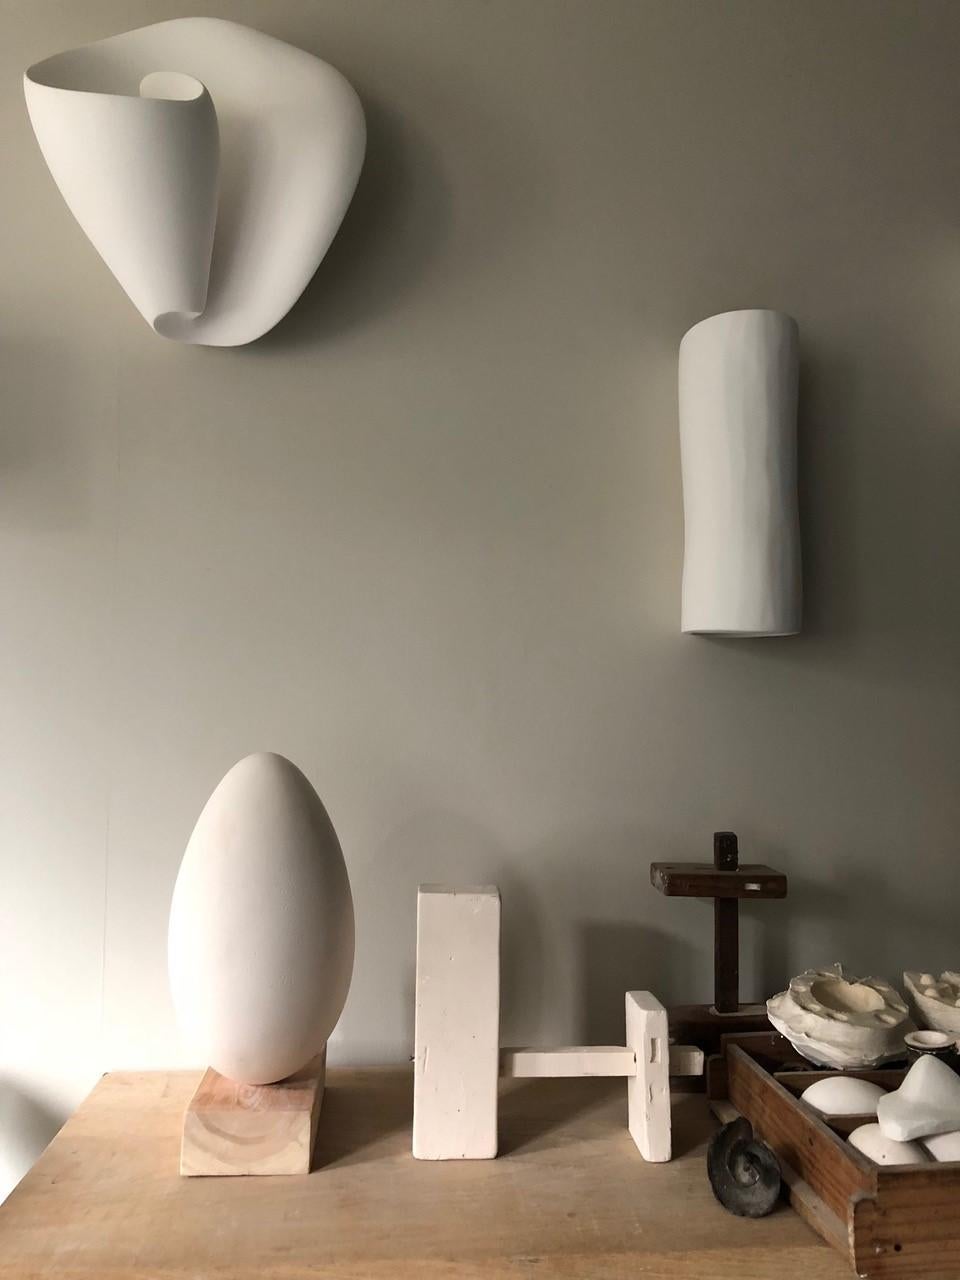 Serenity Sofie Contemporary Wall Sconce/Light, Weißer Gips, Hannah Woodhouse im Angebot 2